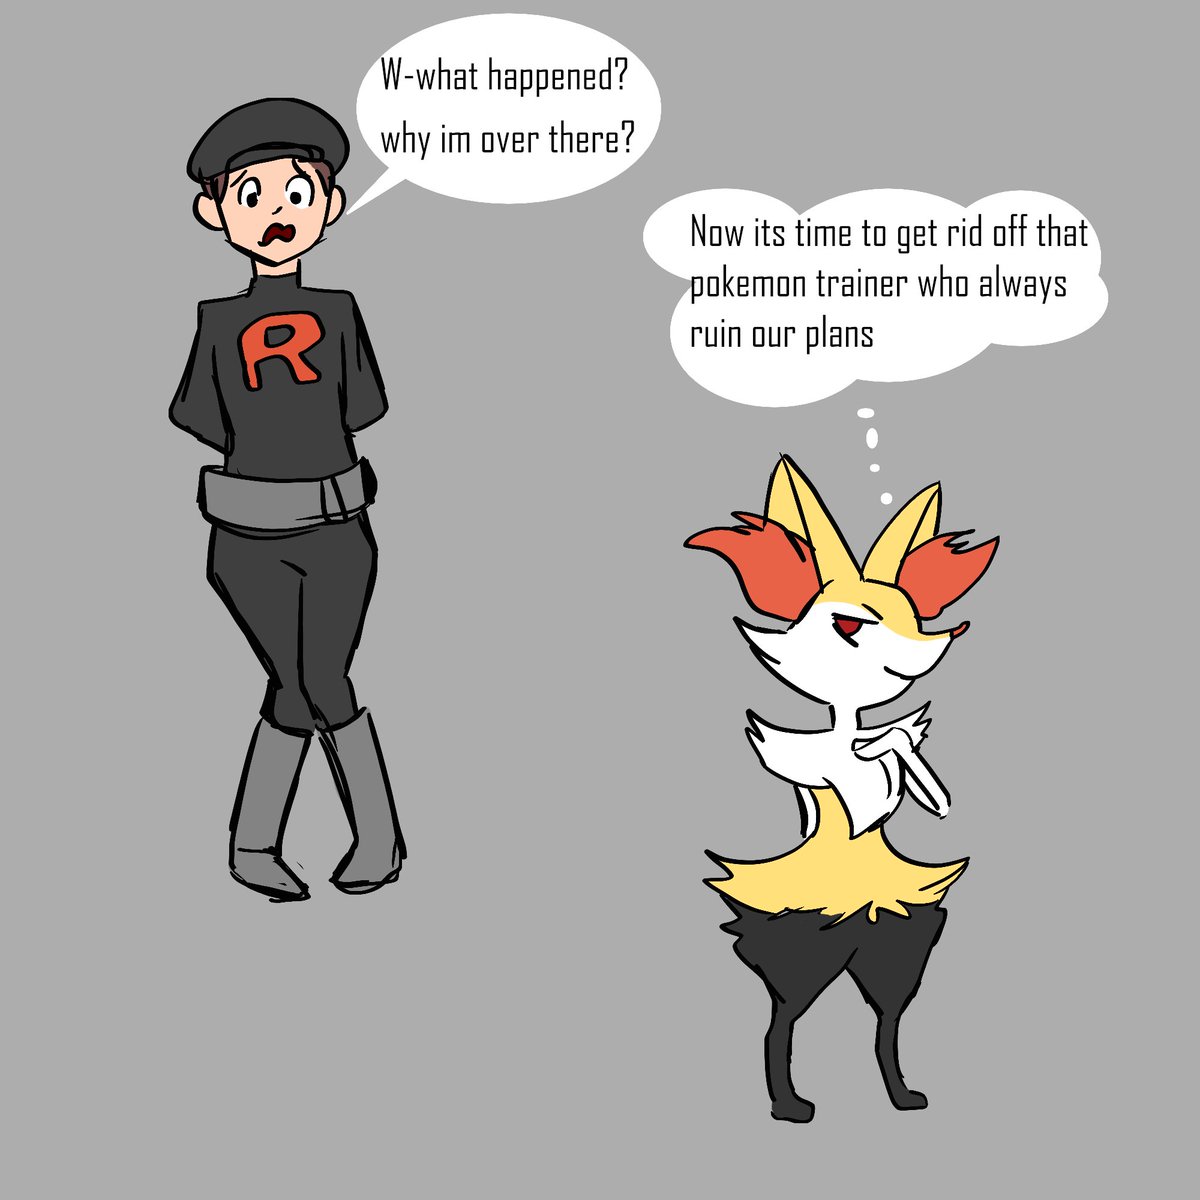 A Team rocket member swaps bodies with a Braixen to escape his crimes and make the trainer who always thwarts his plans pay #bodyswap #pokemon